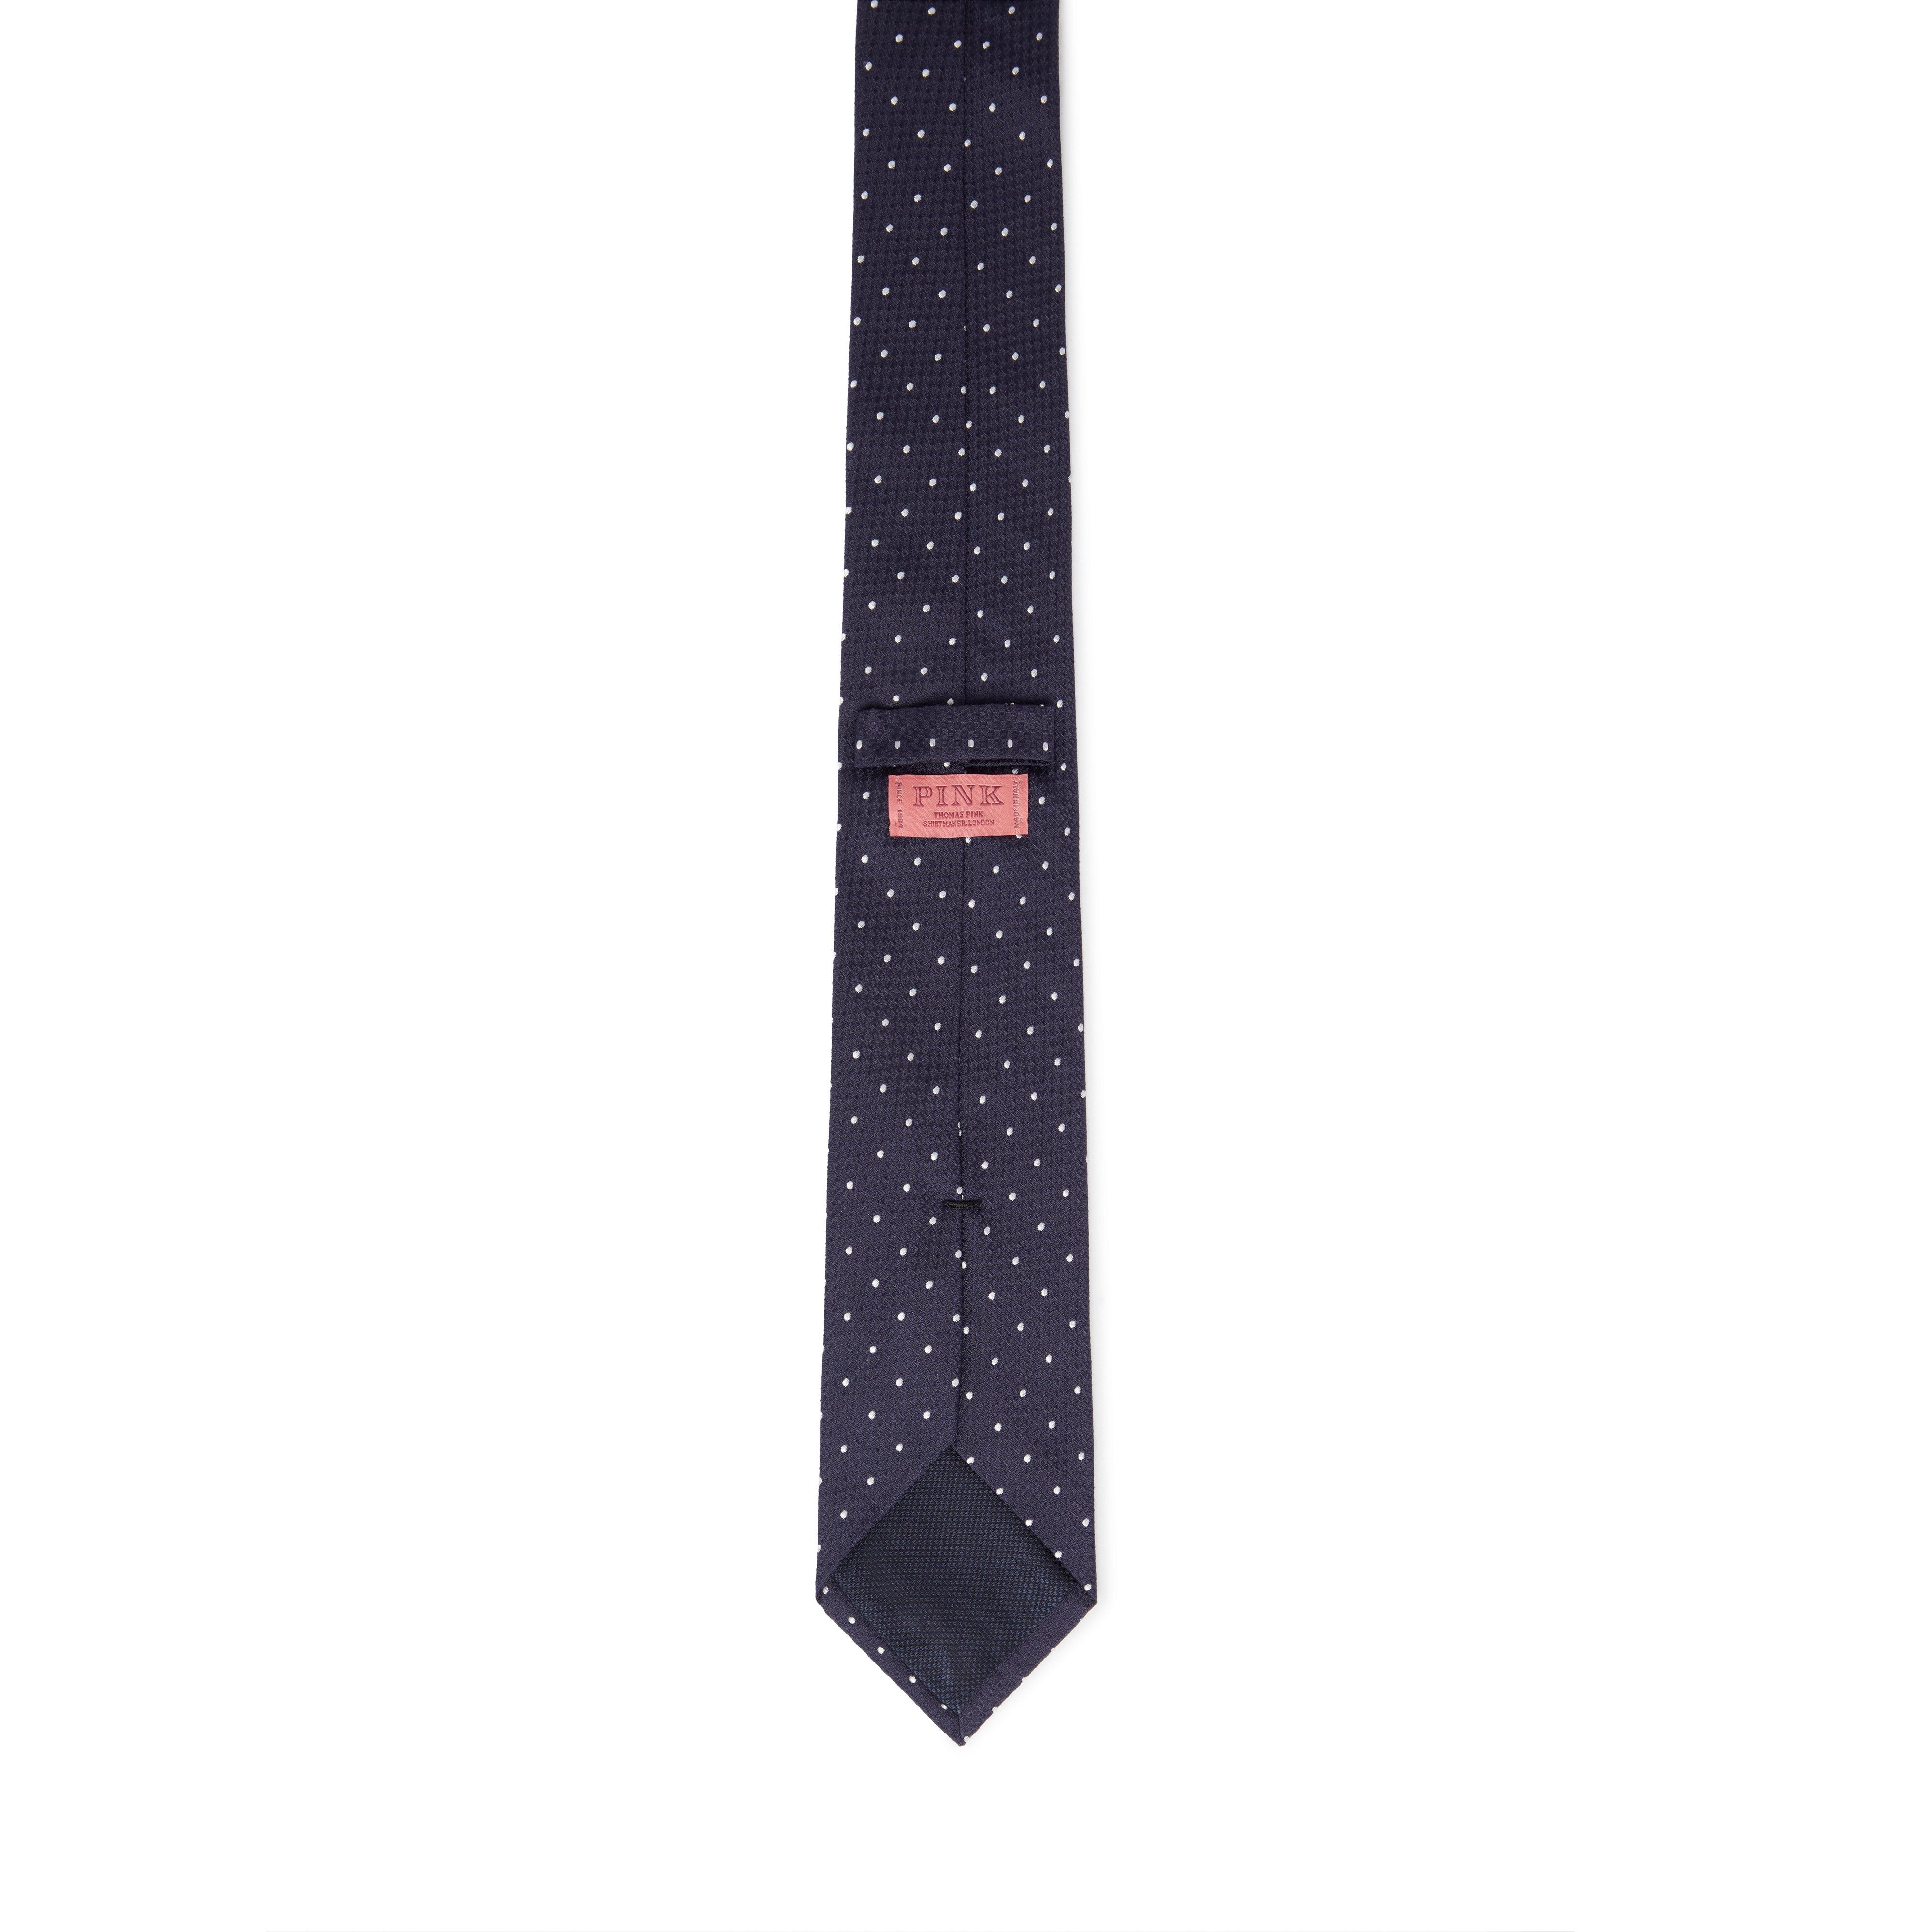 Men's Vintage Thomas Pink Tie - clothing & accessories - by owner